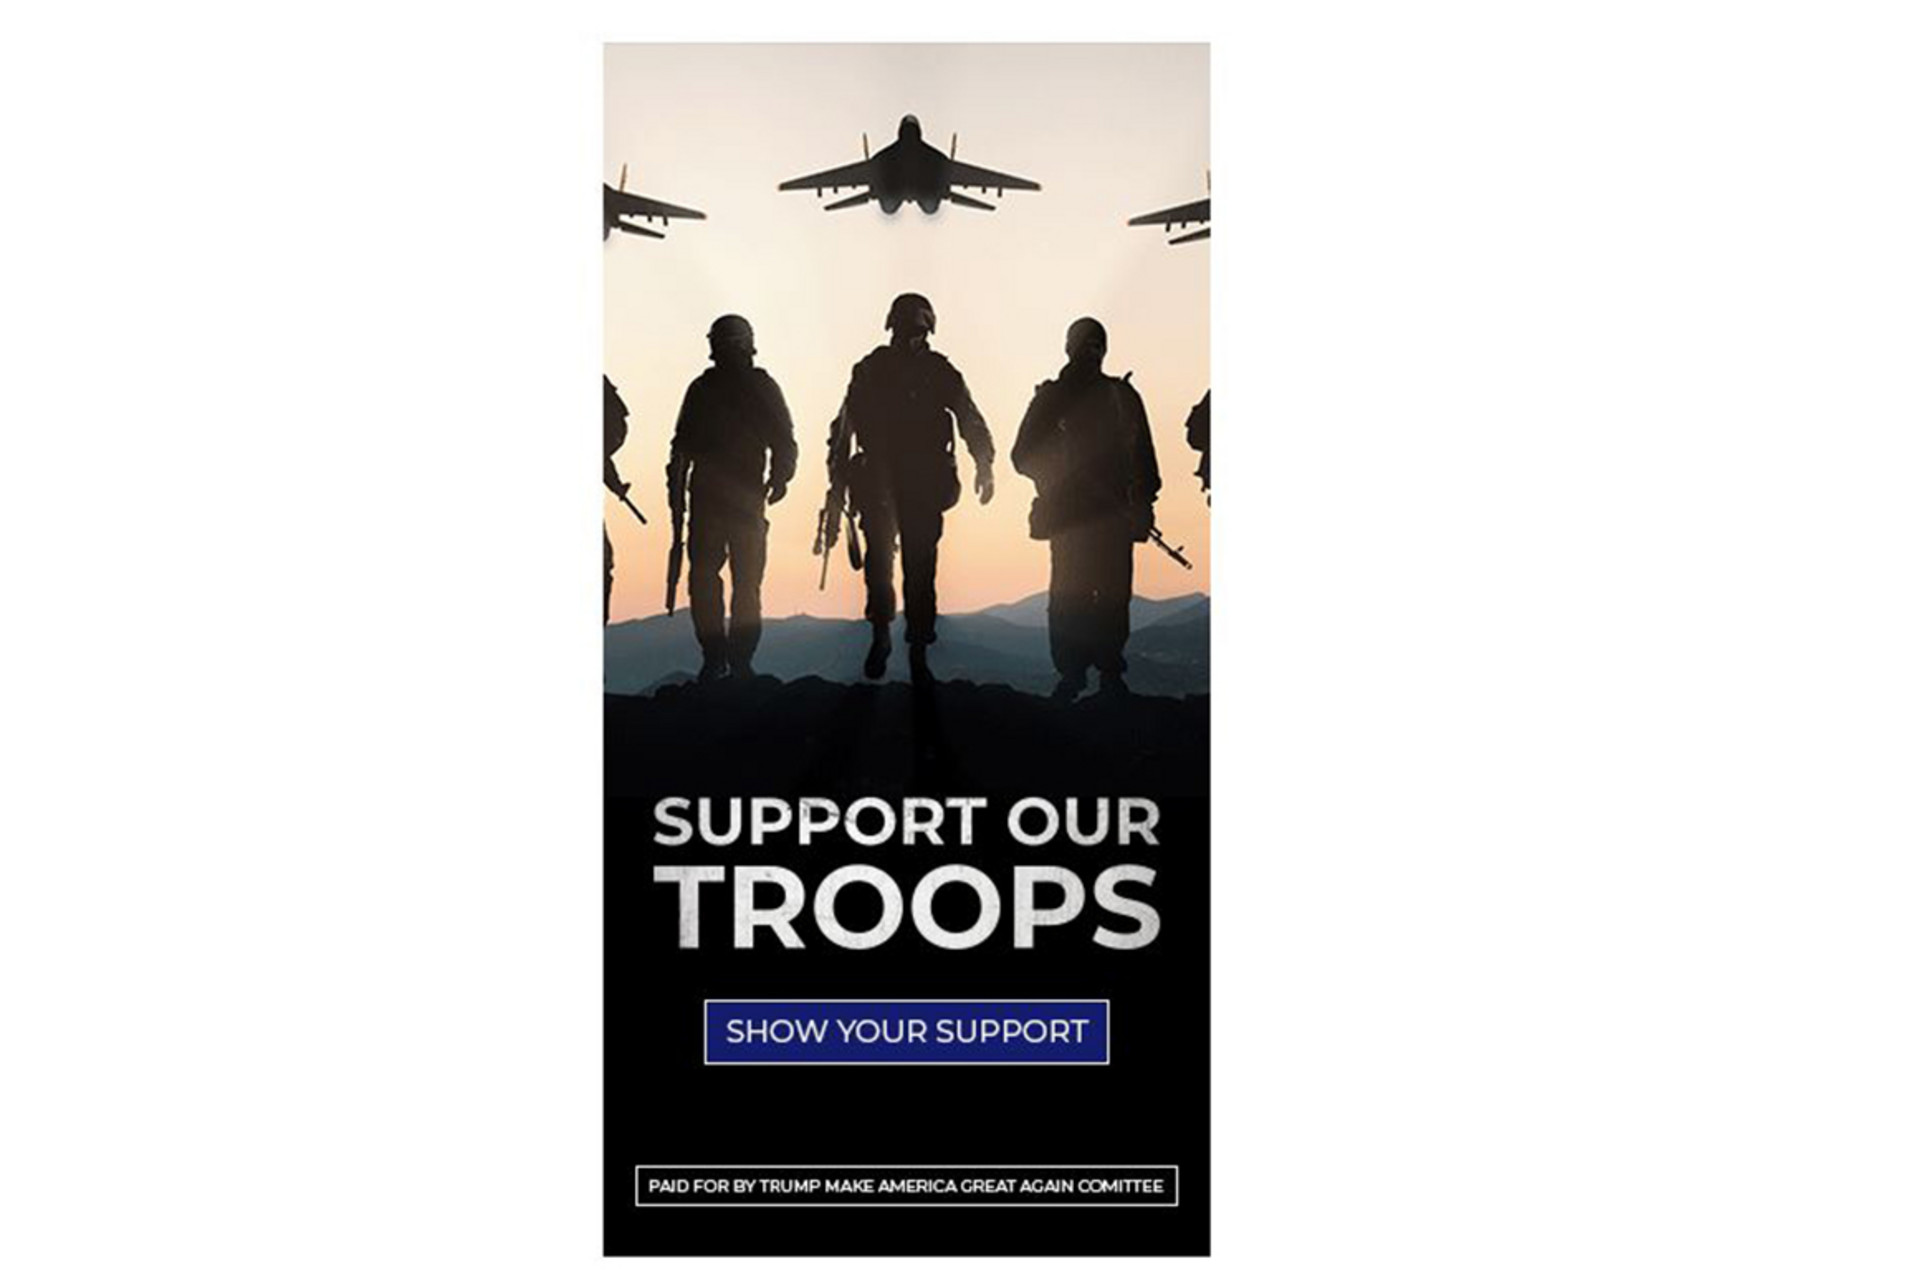 Trump Campaign Uses Poster Featuring Russian MiG-29 And Models With AK-47s